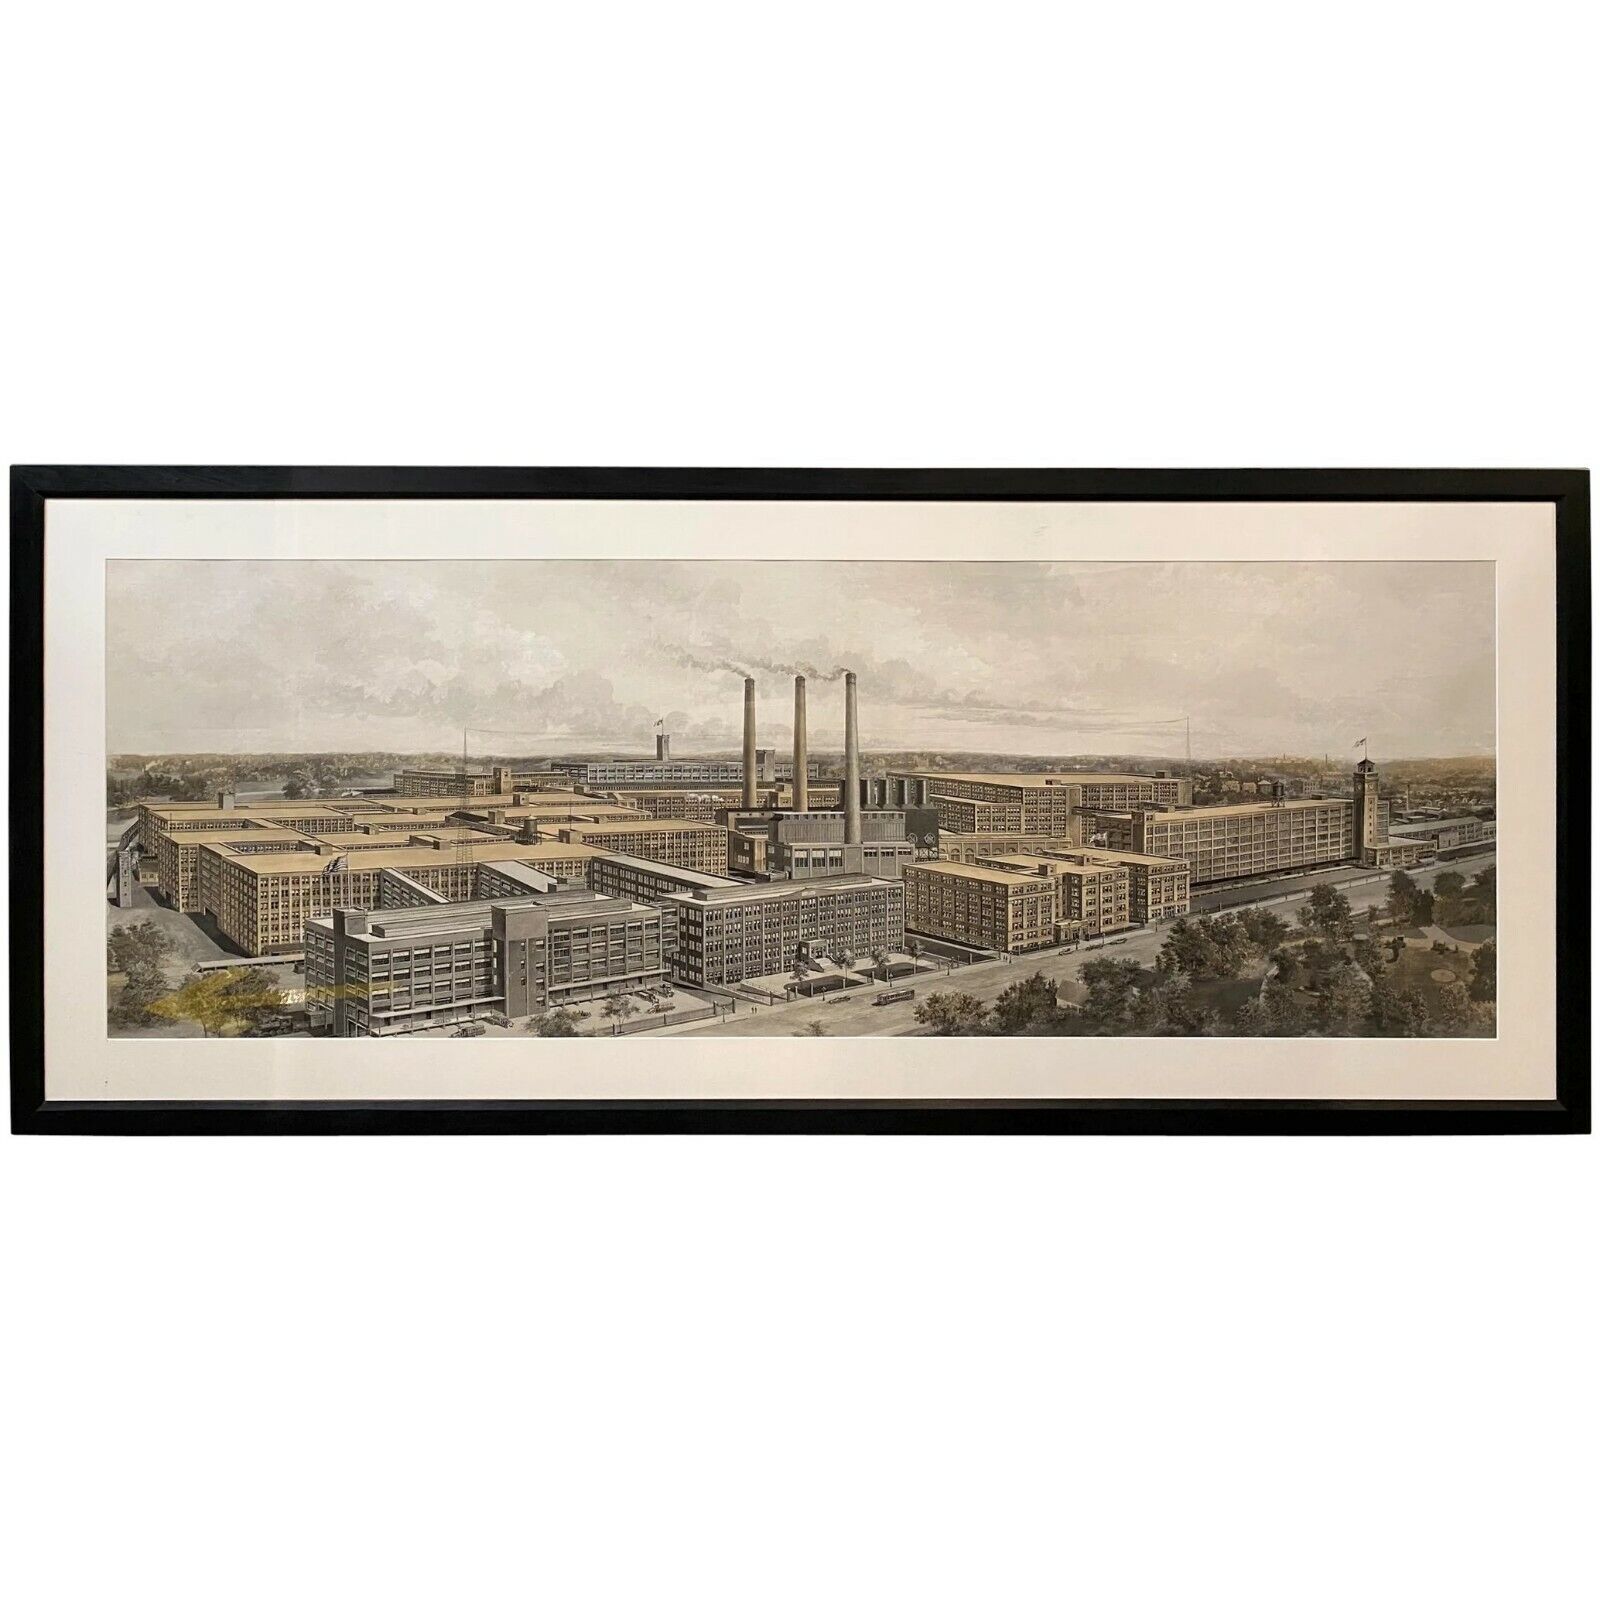 Goodyear Panoramic Factory Print with Gouache by Woodbury & Co, Worcester MA